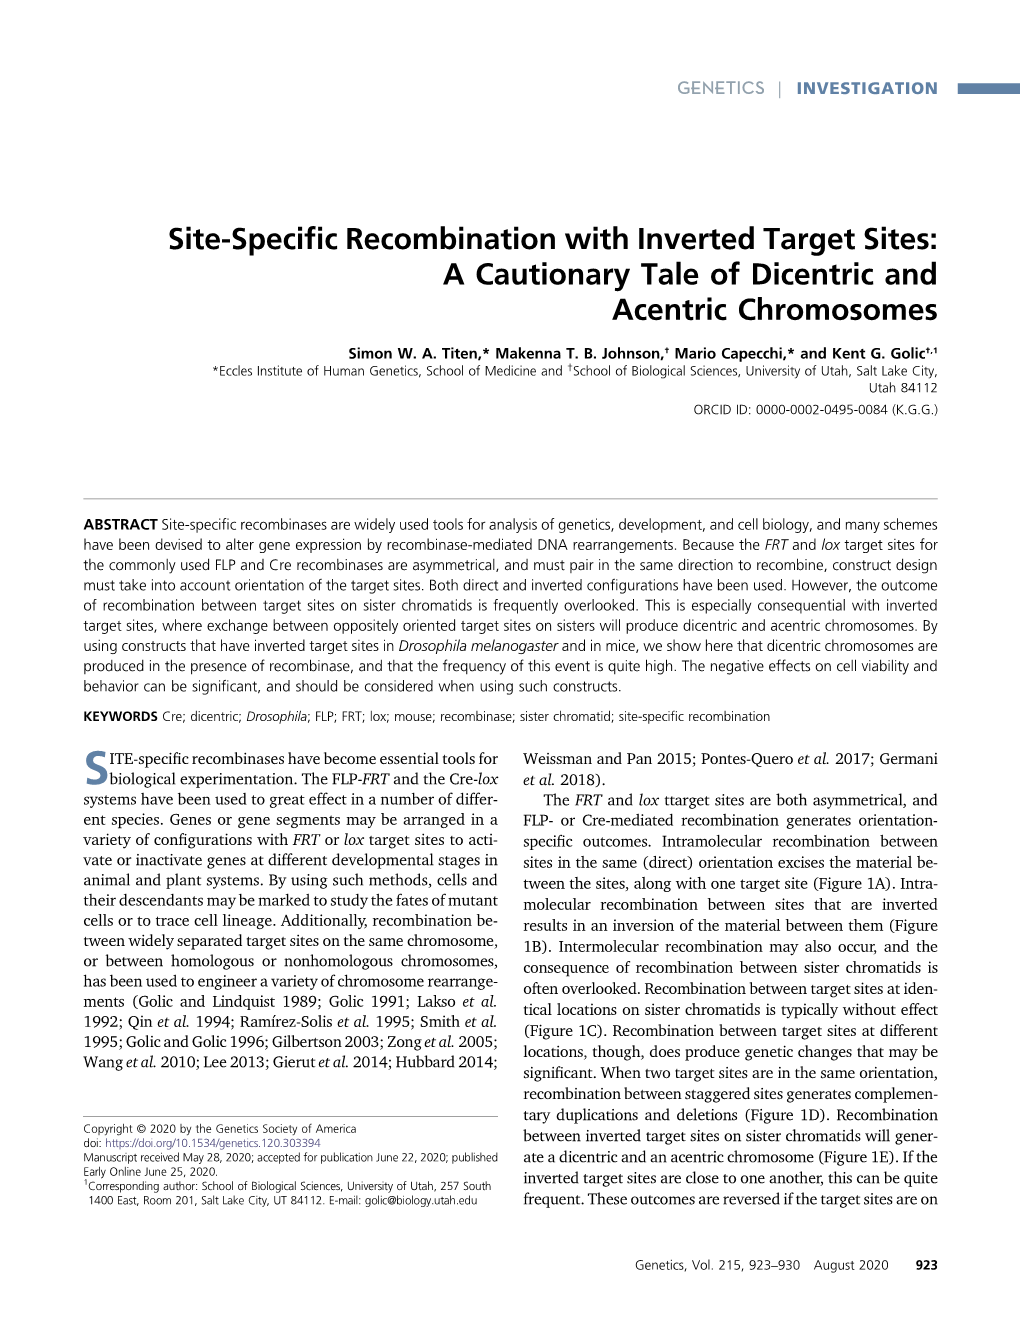 Site-Specific Recombination with Inverted Target Sites: A